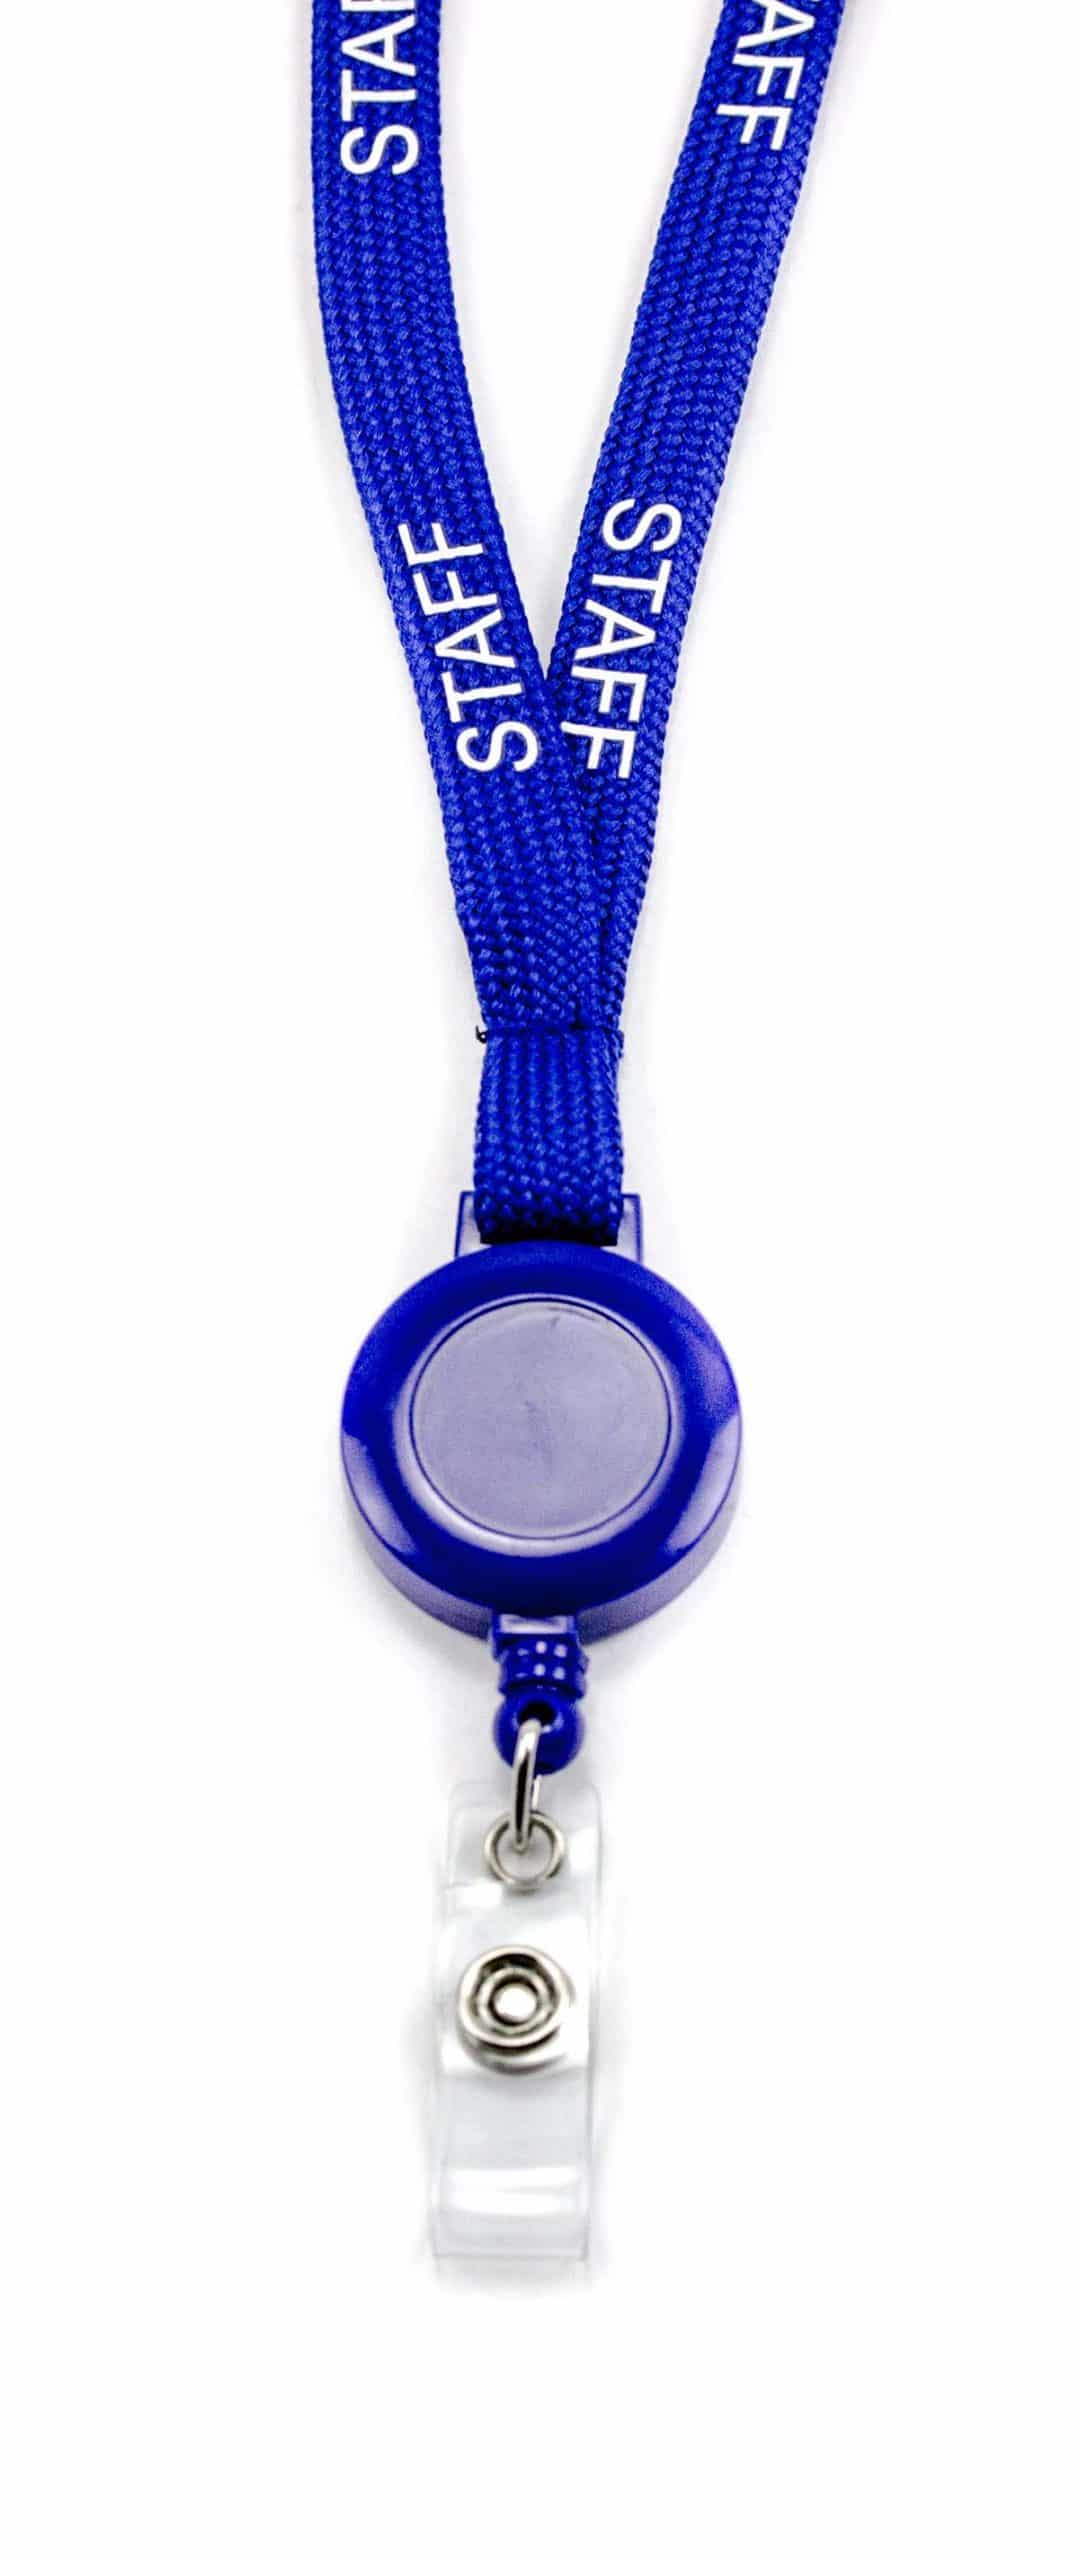 https://www.redstrawberry.co.uk/wp-content/uploads/nc/data/images/RS15/20088-Staff-Blue-Retractable-Lanyard-2-scaled.jpg